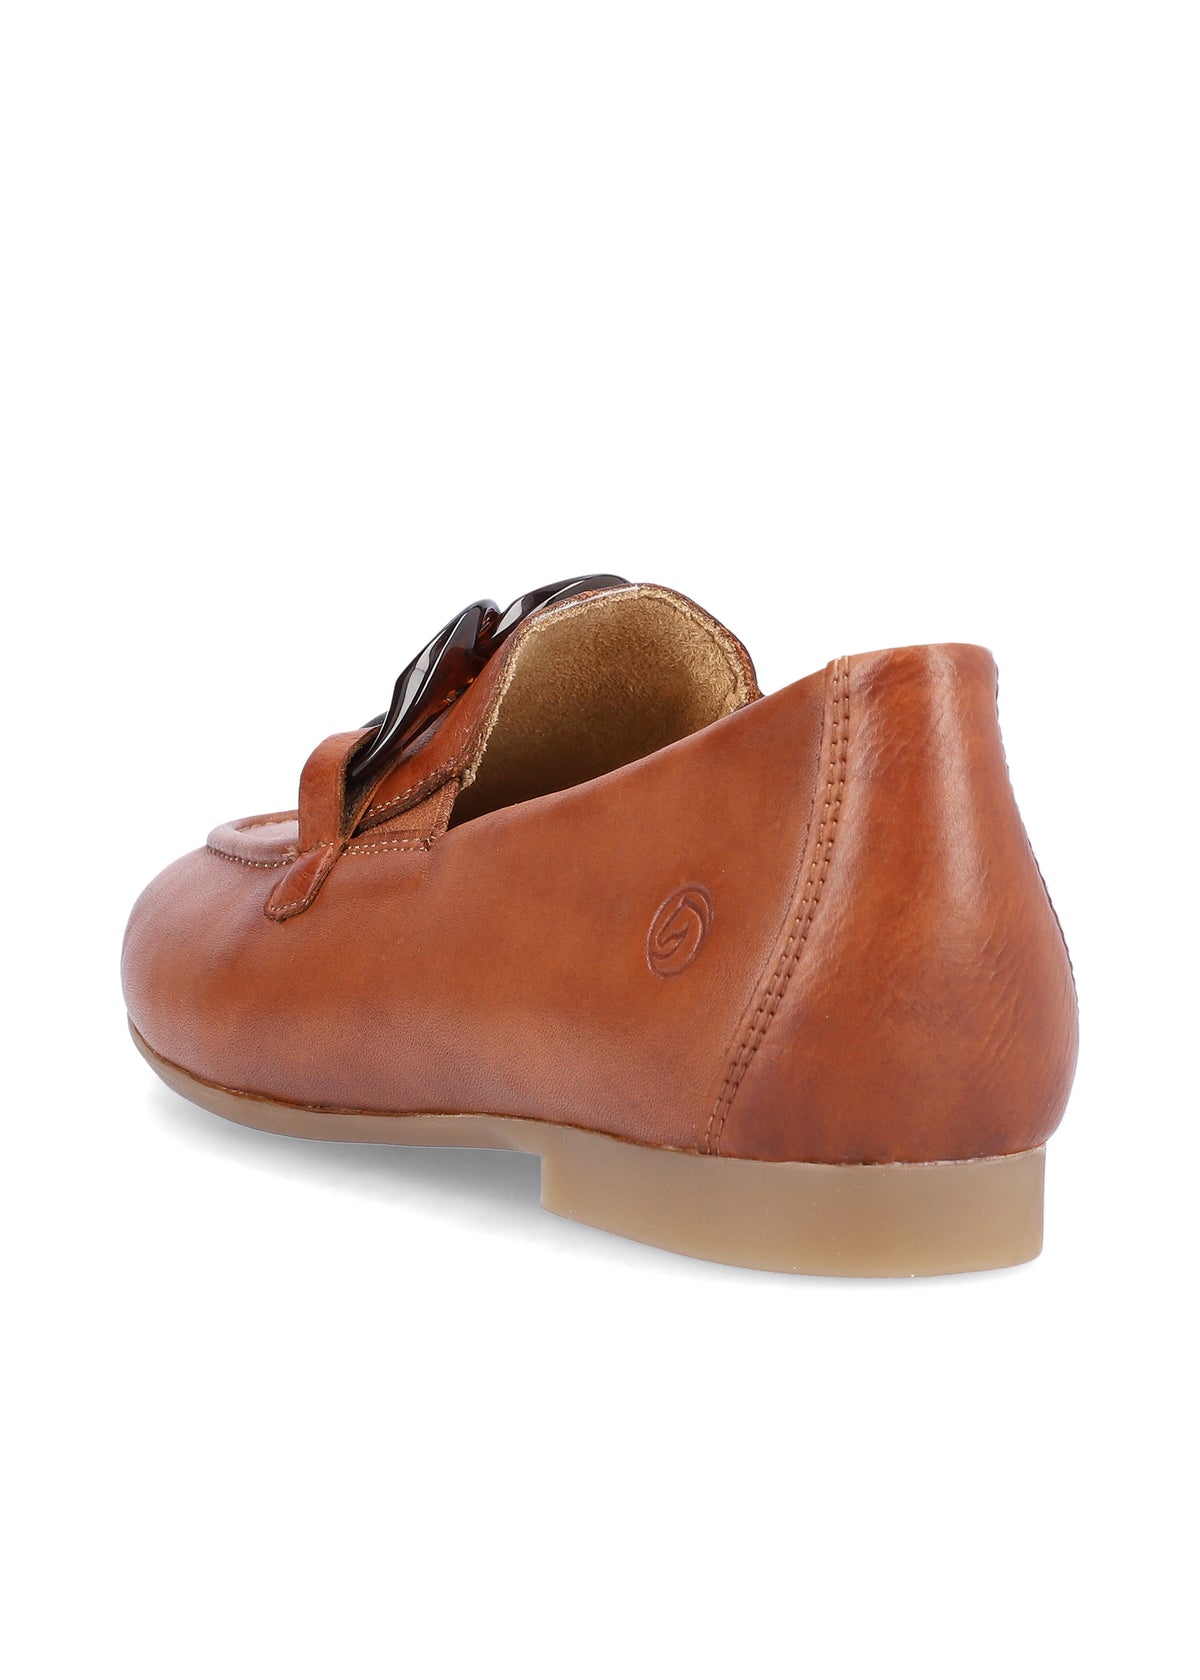 Loafers - brown top leather, buckle decoration